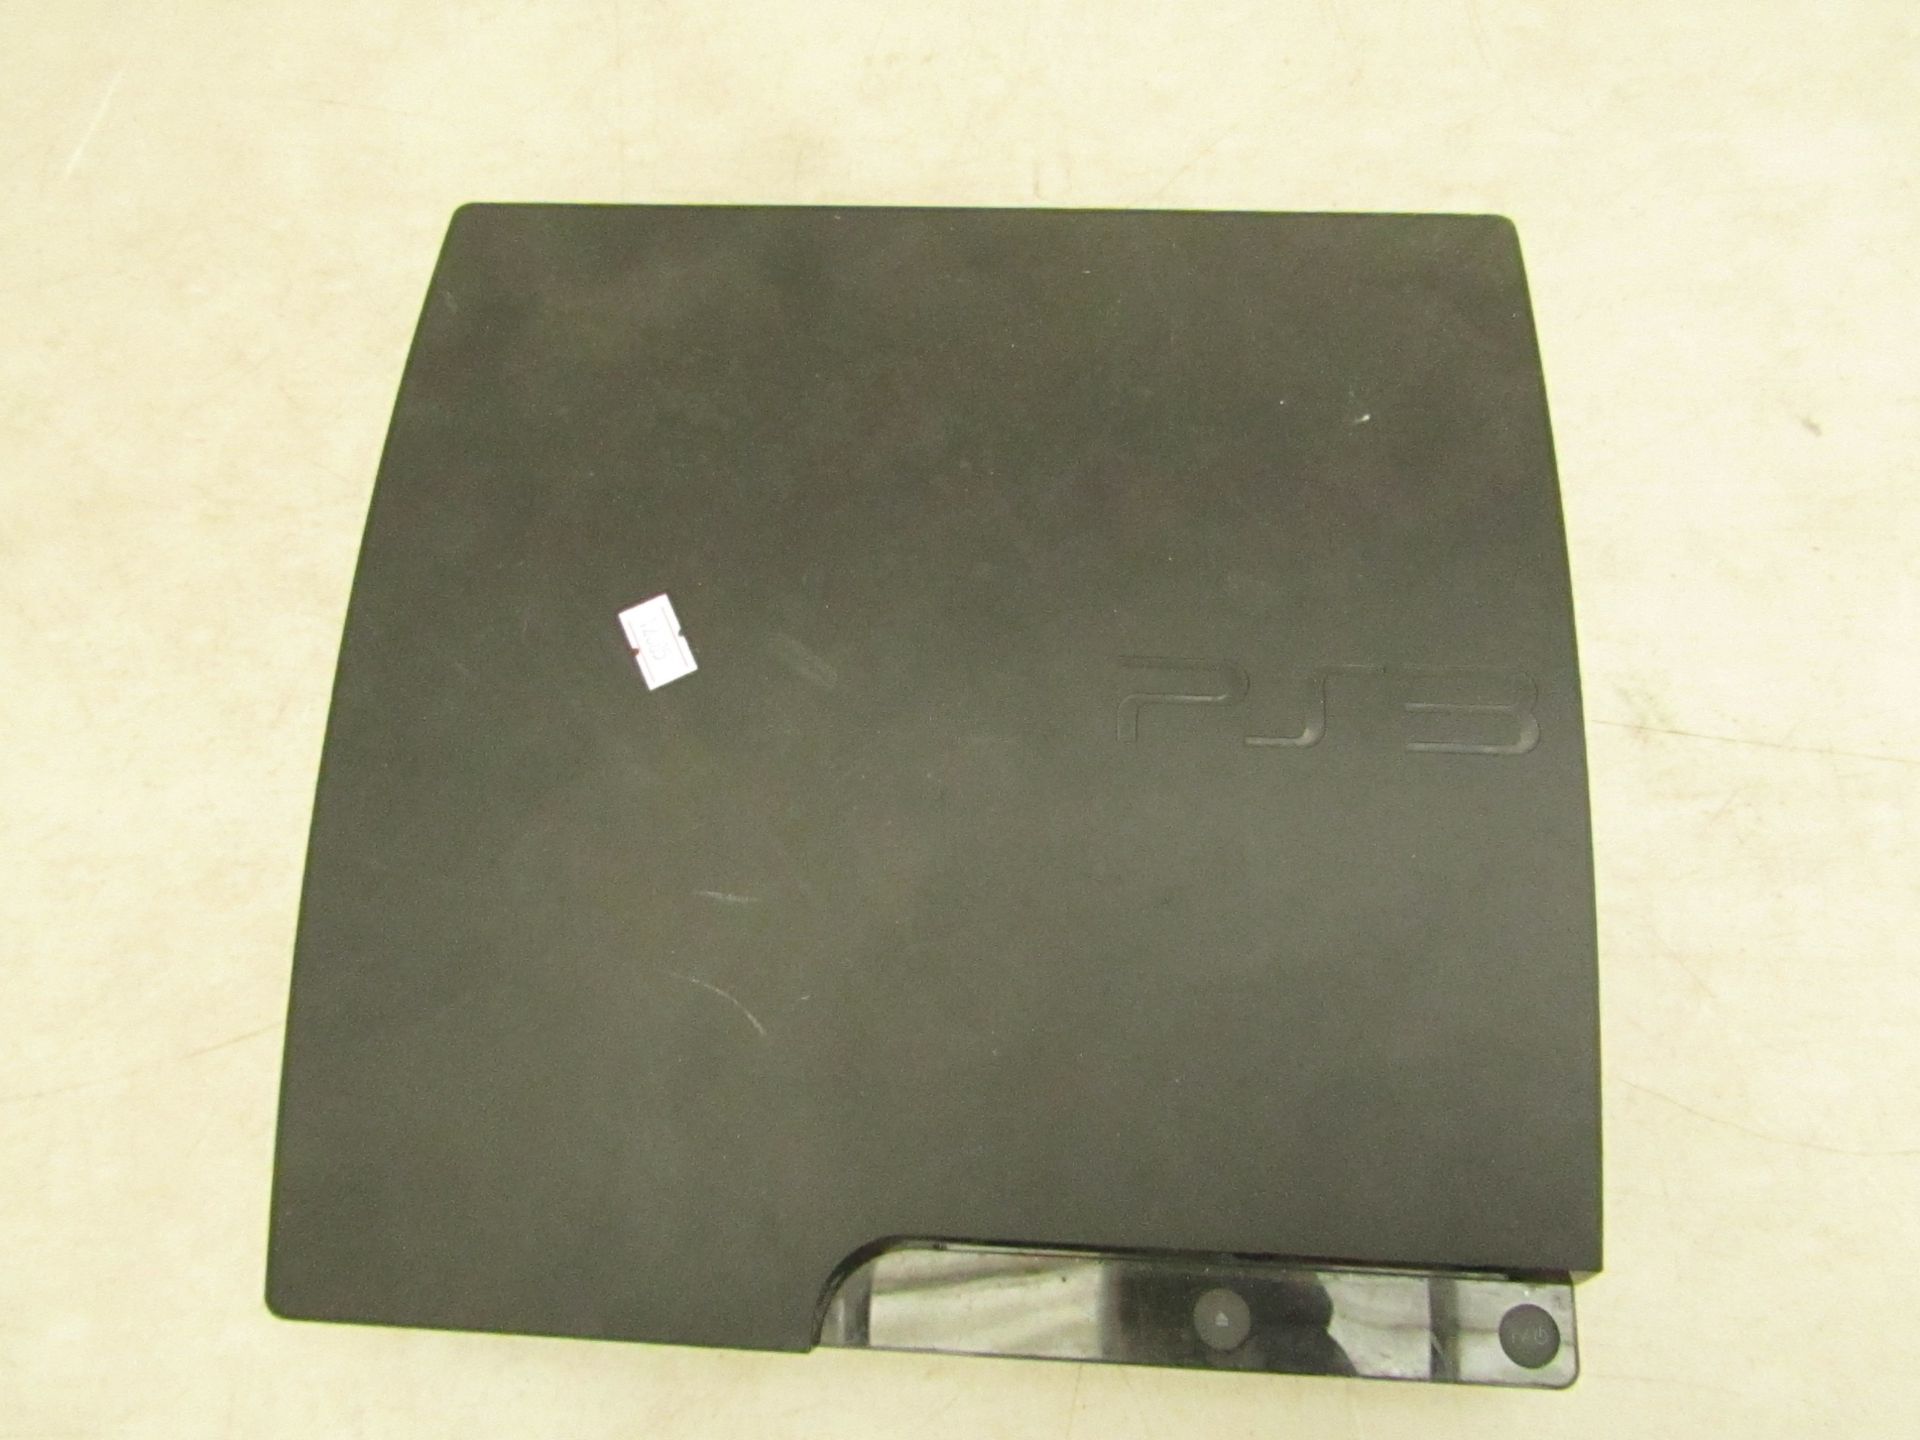 3x PlayStation 3 systems, only the console no accessories or power cables, all unchecked.